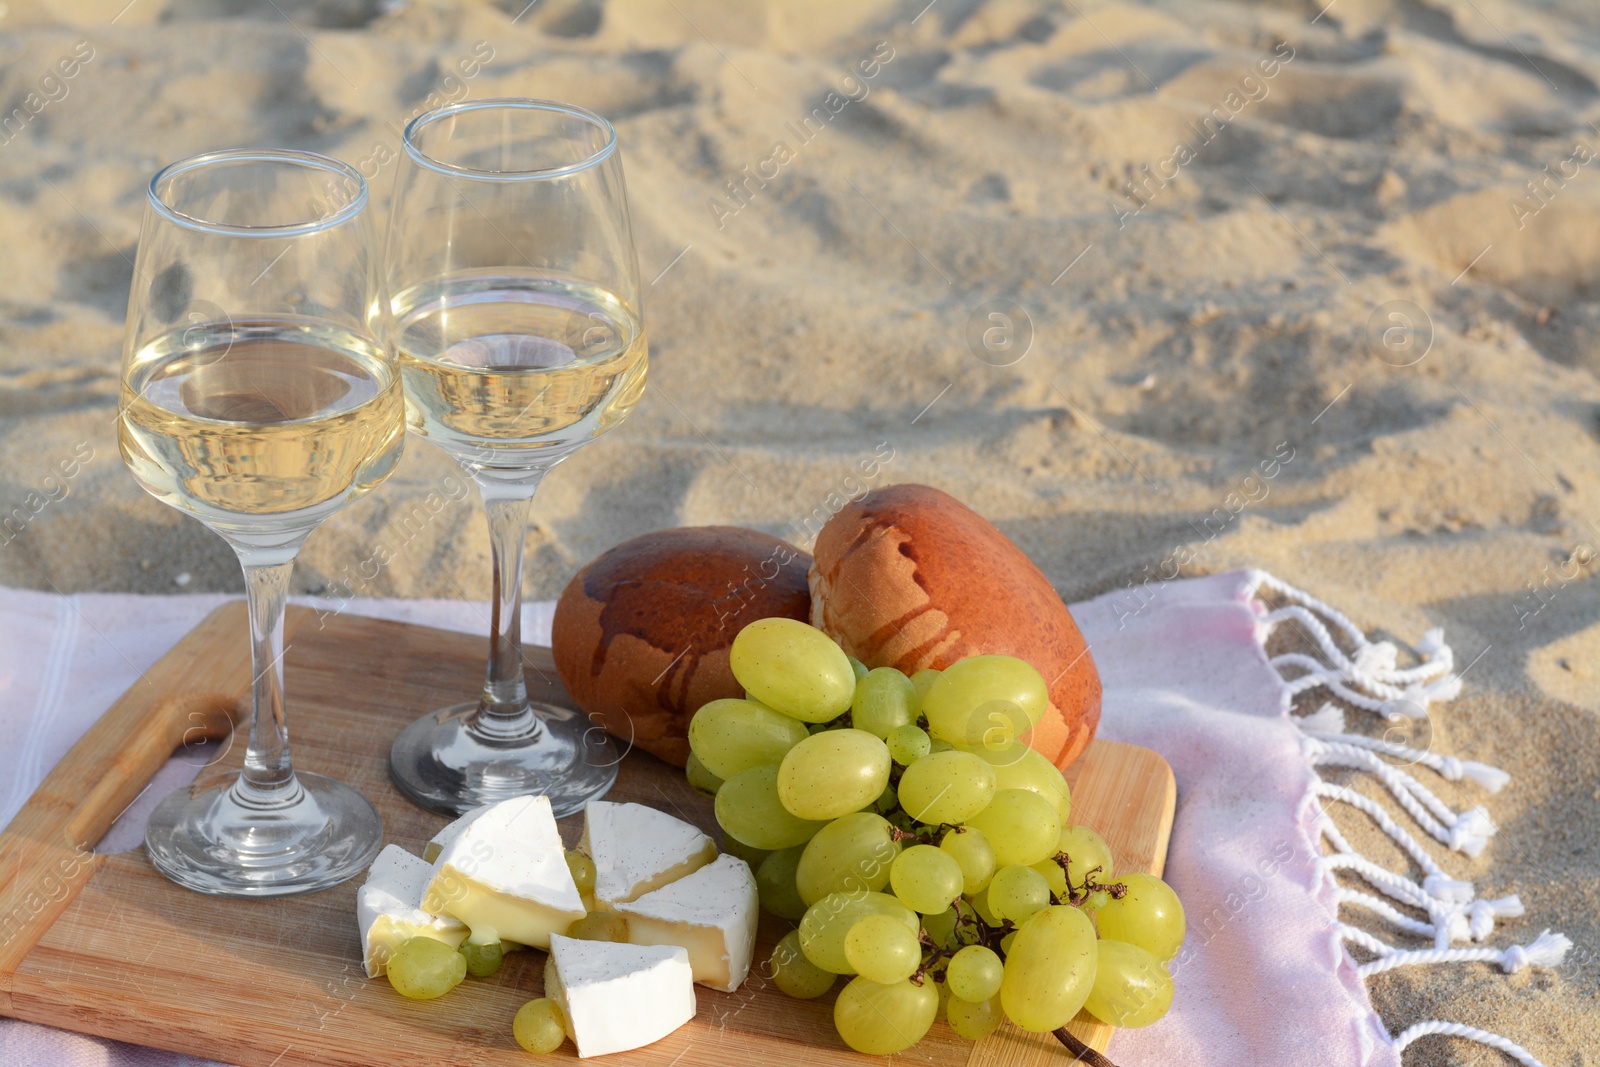 Photo of Glasses with white wine and snacks for beach picnic on sand outdoors